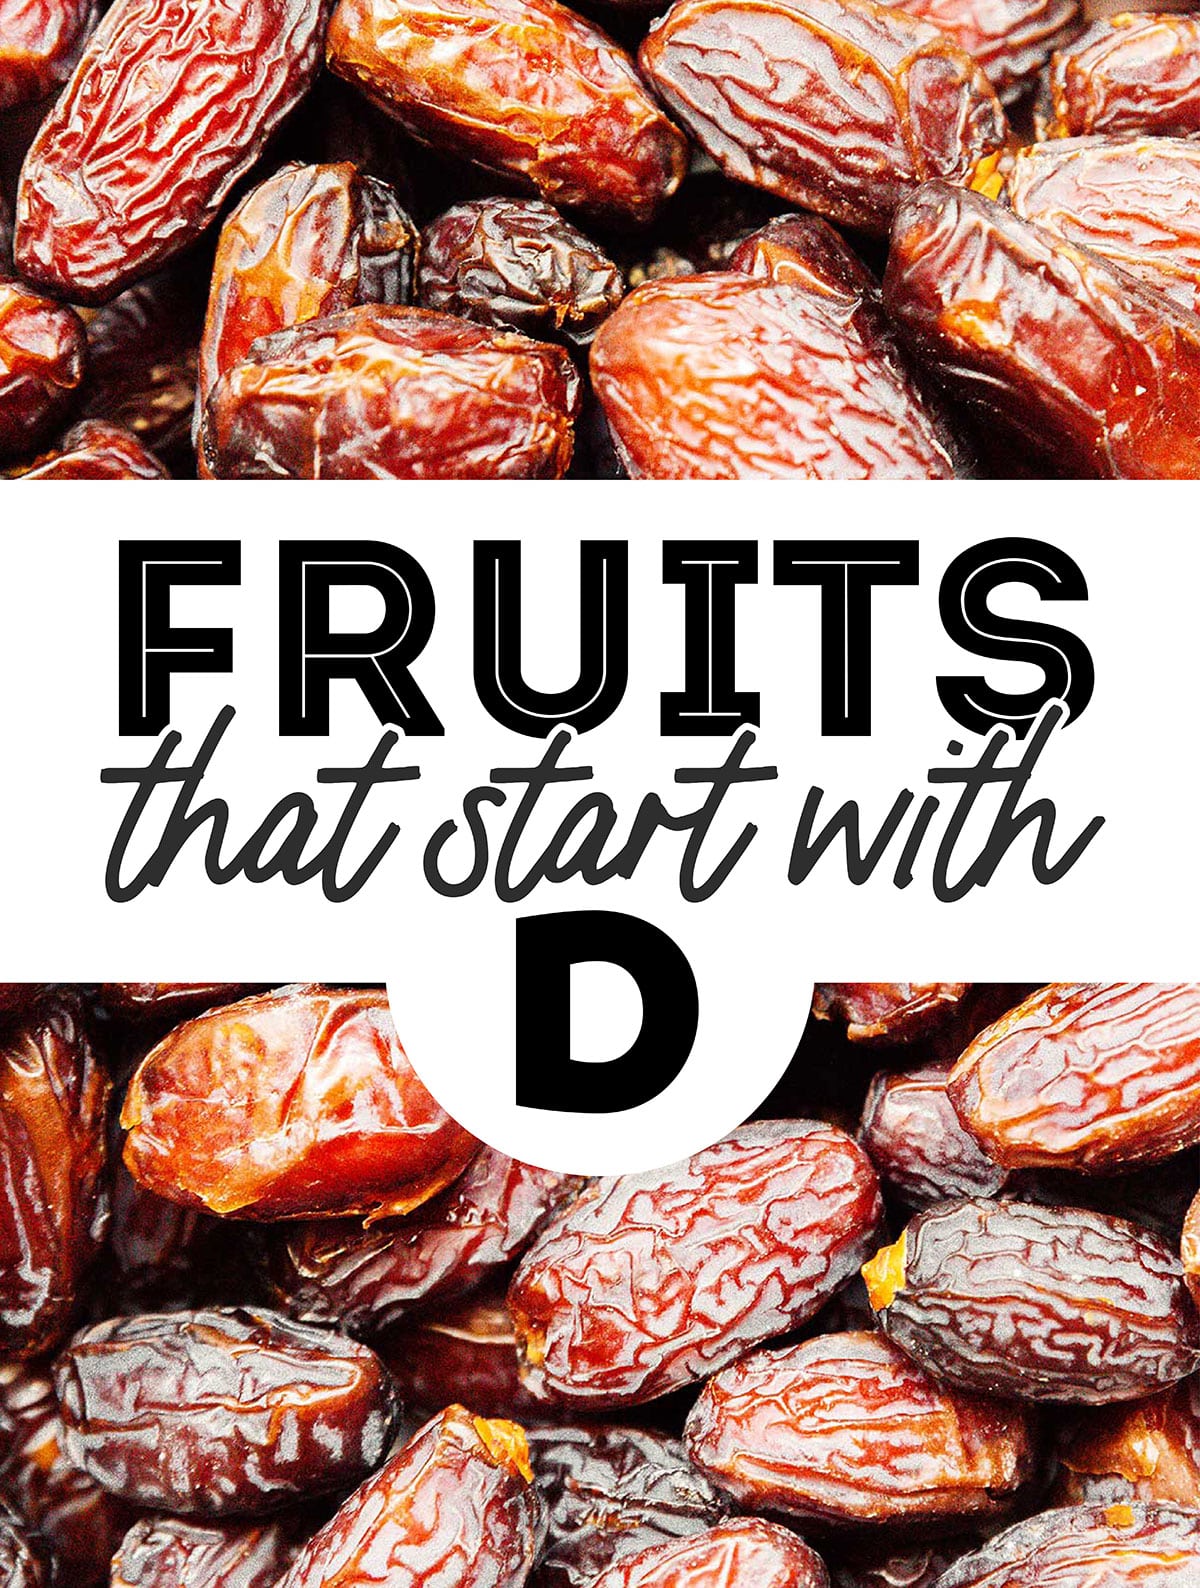 Decorative image that says "fruits that start with D"